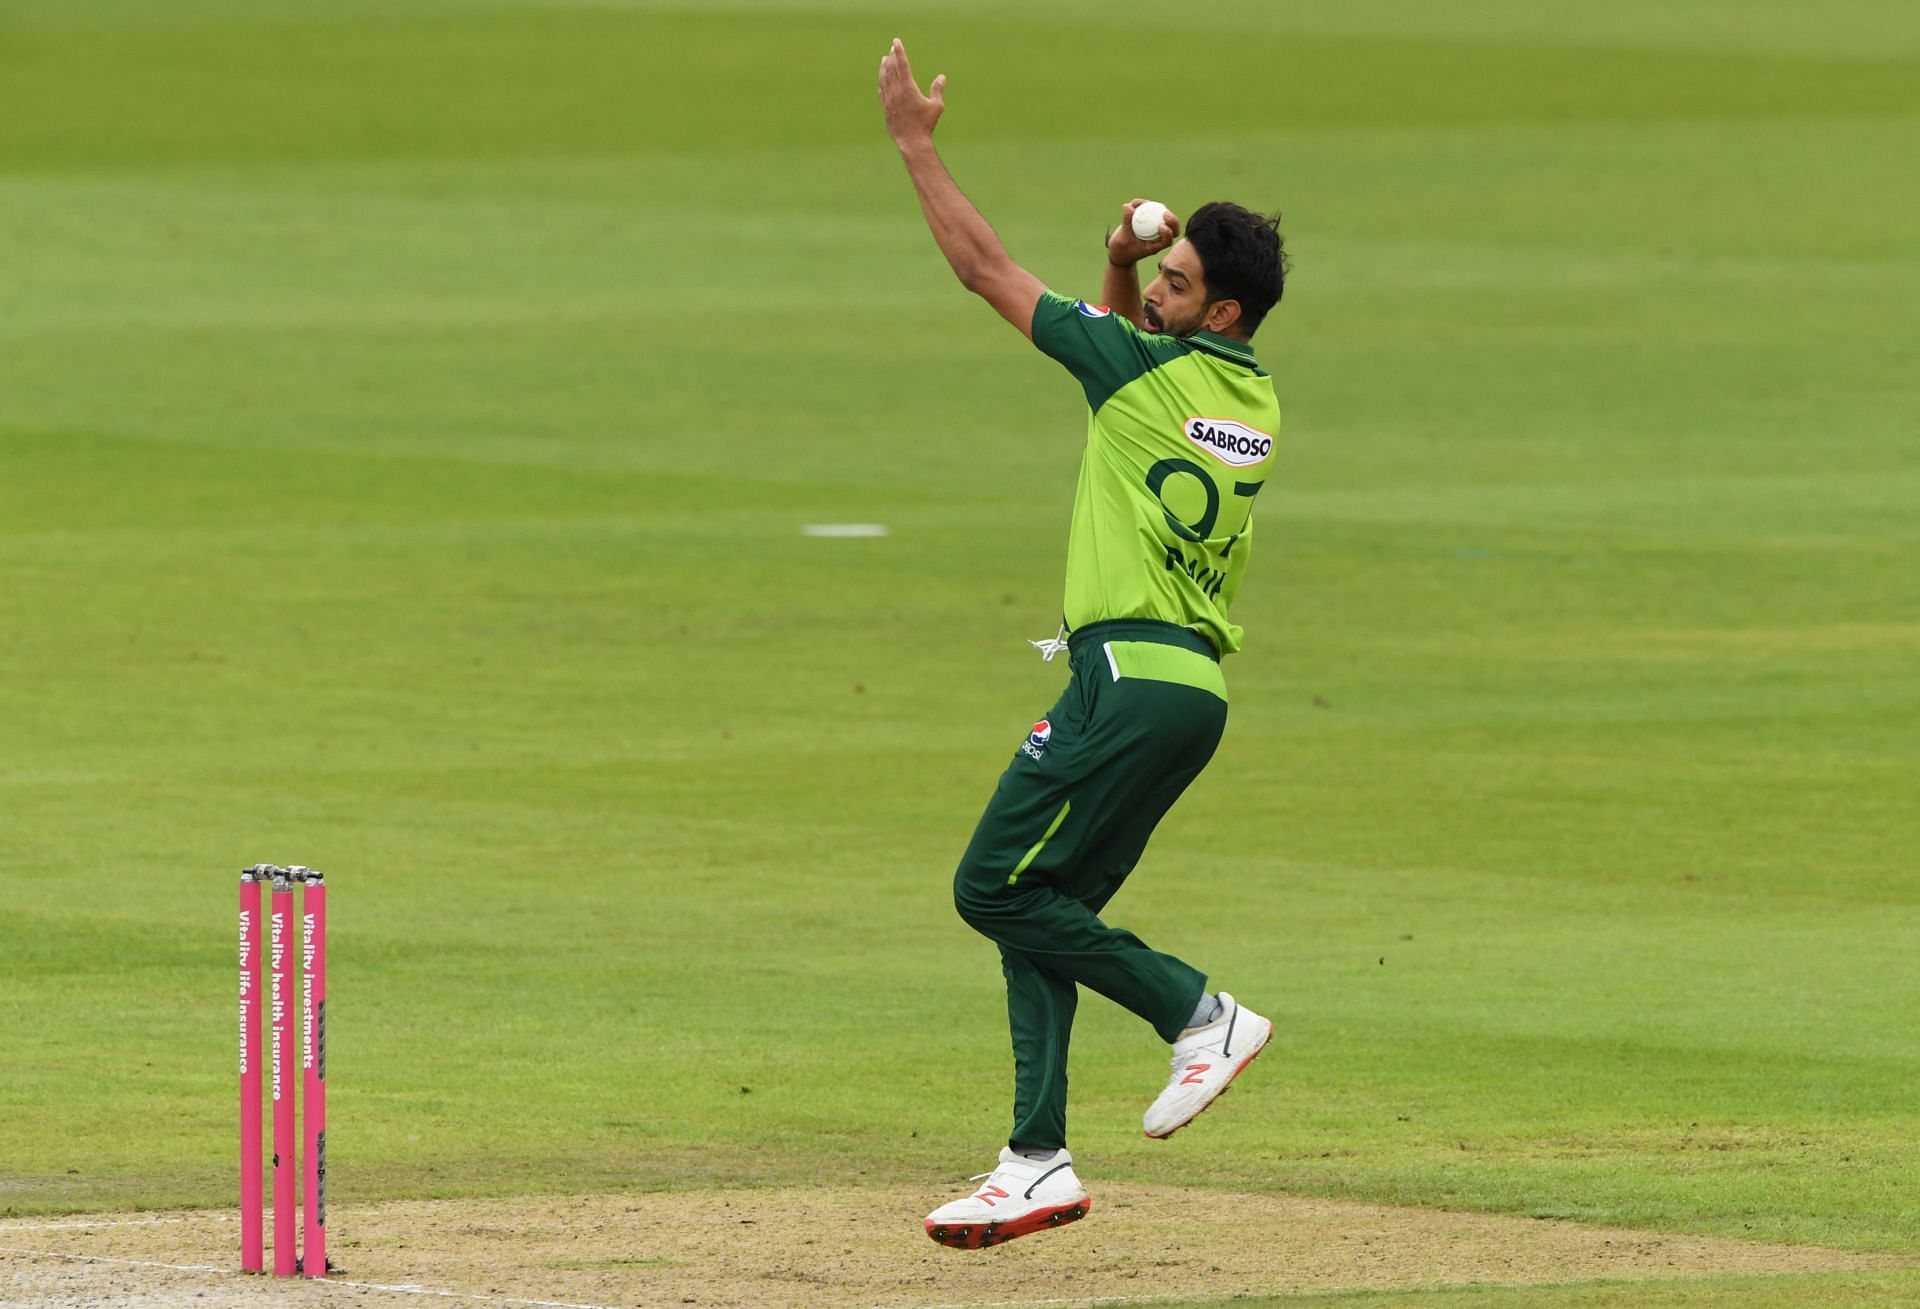 Haris Rauf in action. (Image: Getty)